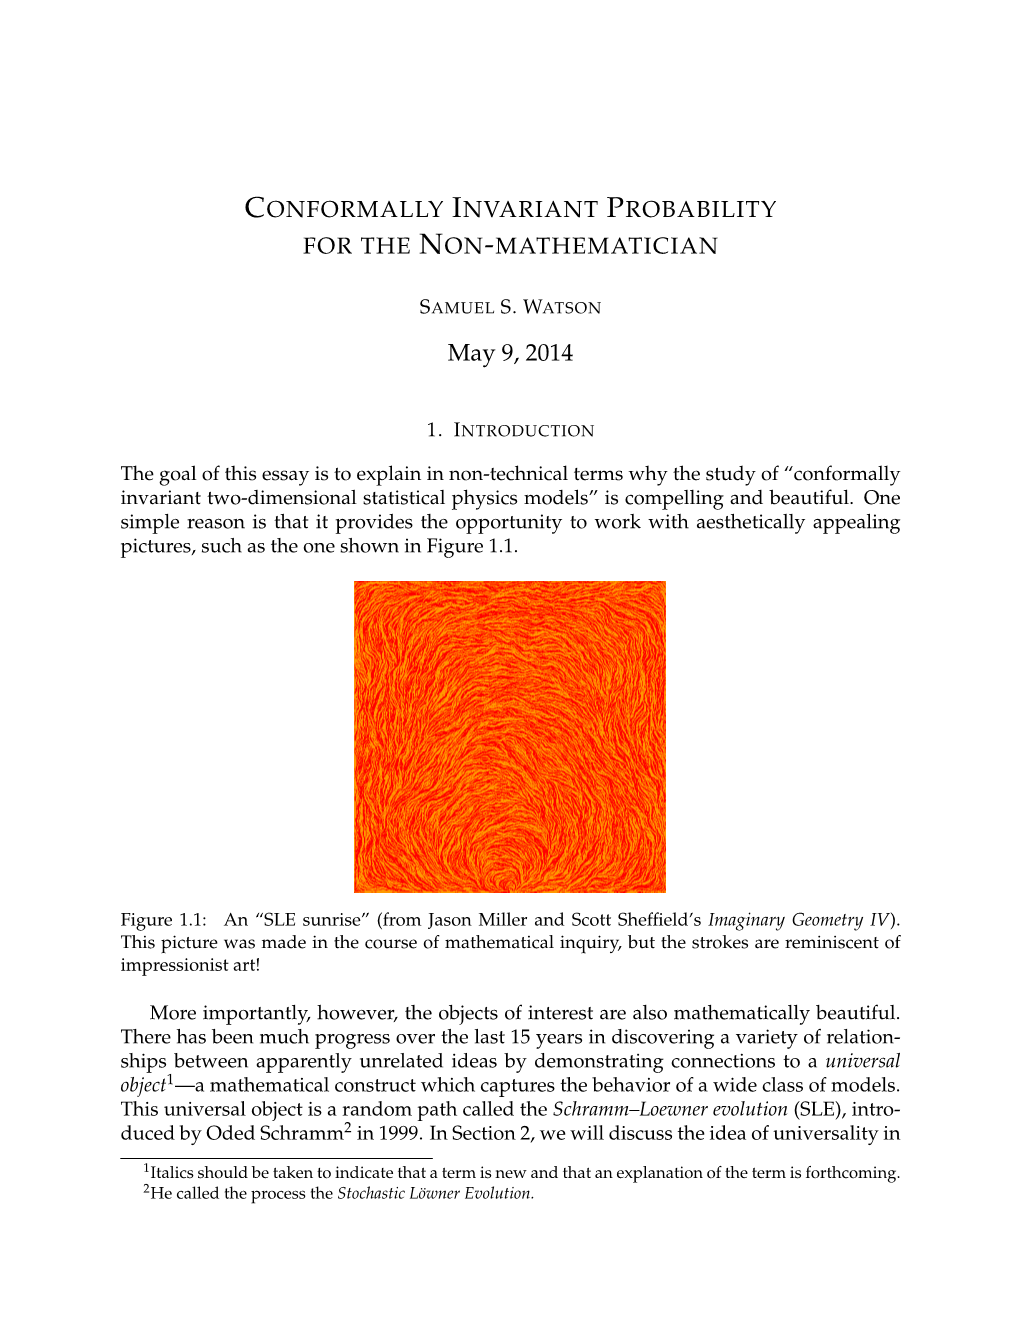 Conformally Invariant Probability for the Nonmathematician